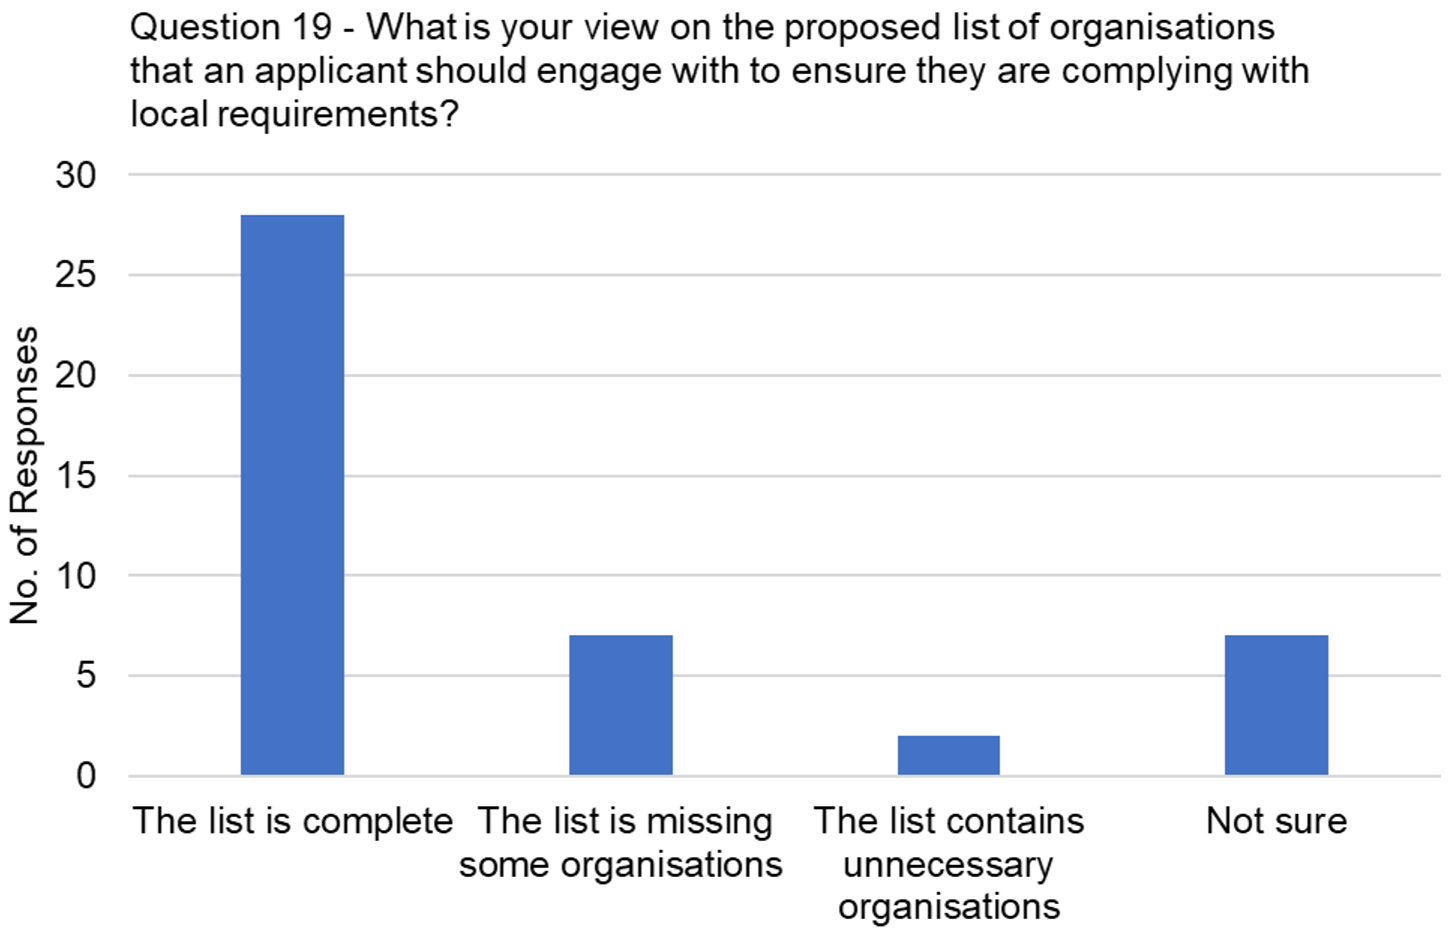 The graph visually presents the data from table 14, focussing on the responses to the question, "What is your view on the proposed list of organisations that an applicant should engage with to ensure they are complying with local requirements?"